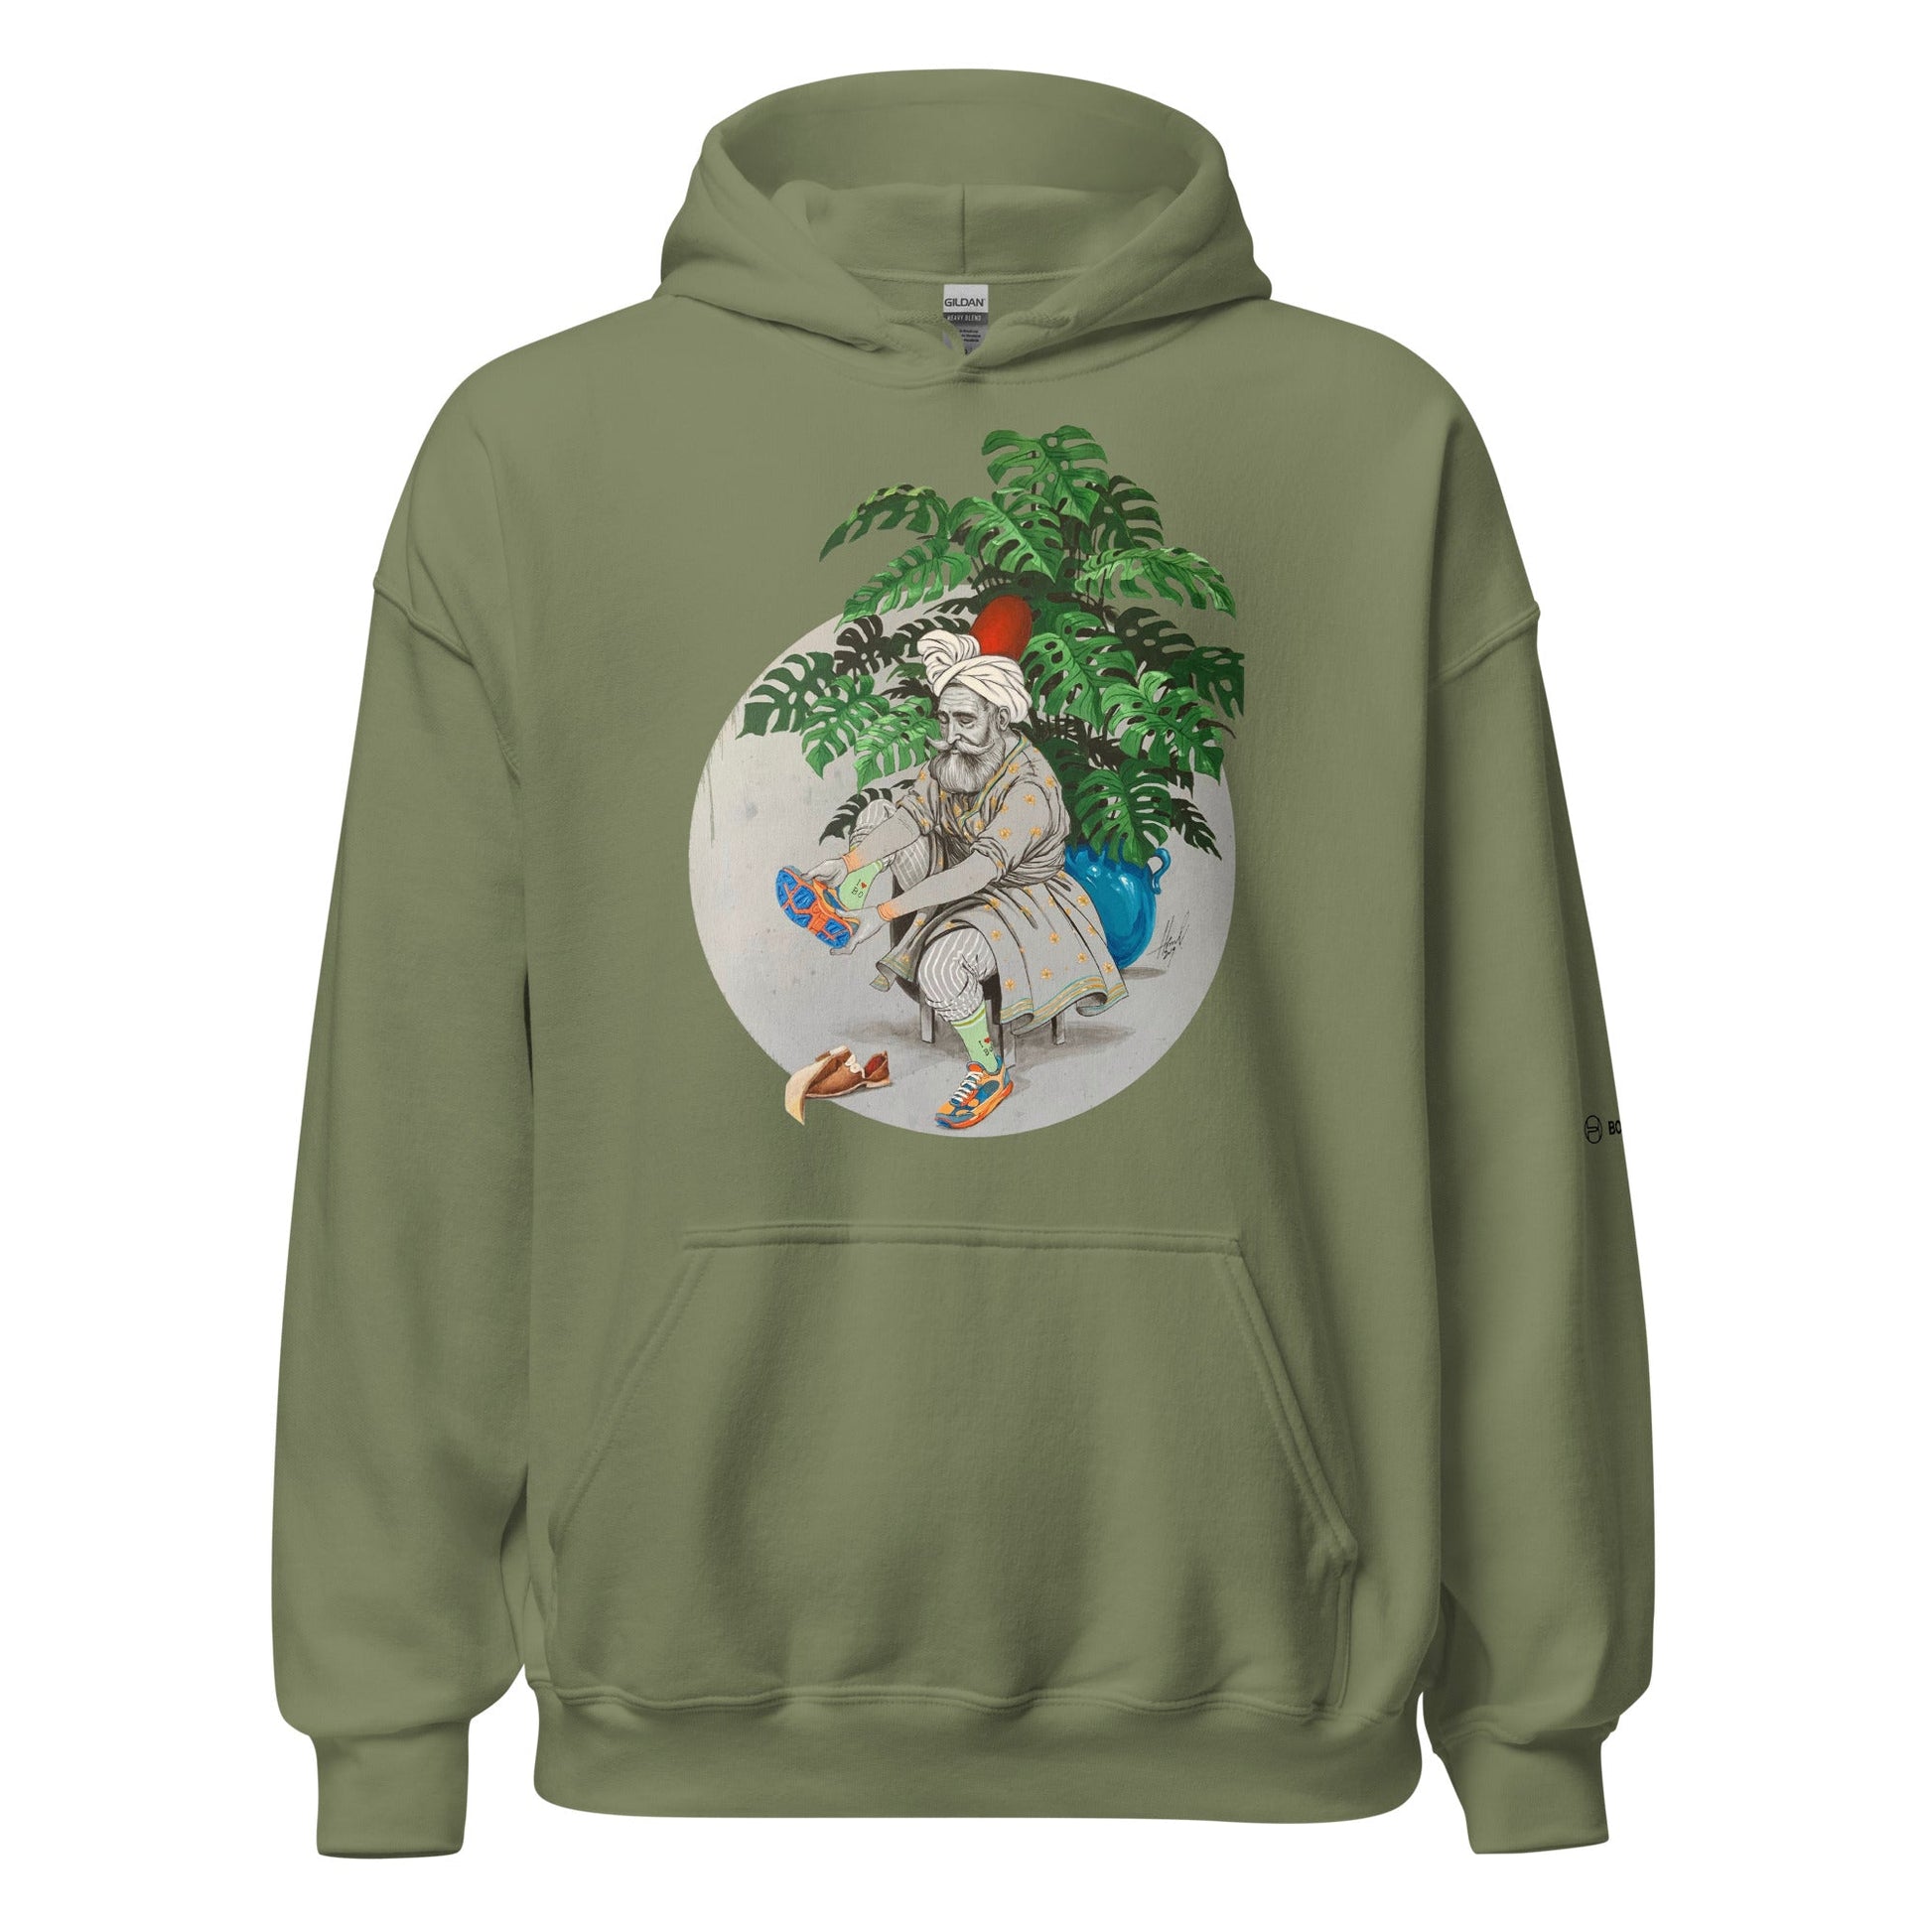 unisex-heavy-blend-hoodie-its-one-small-size-military-green